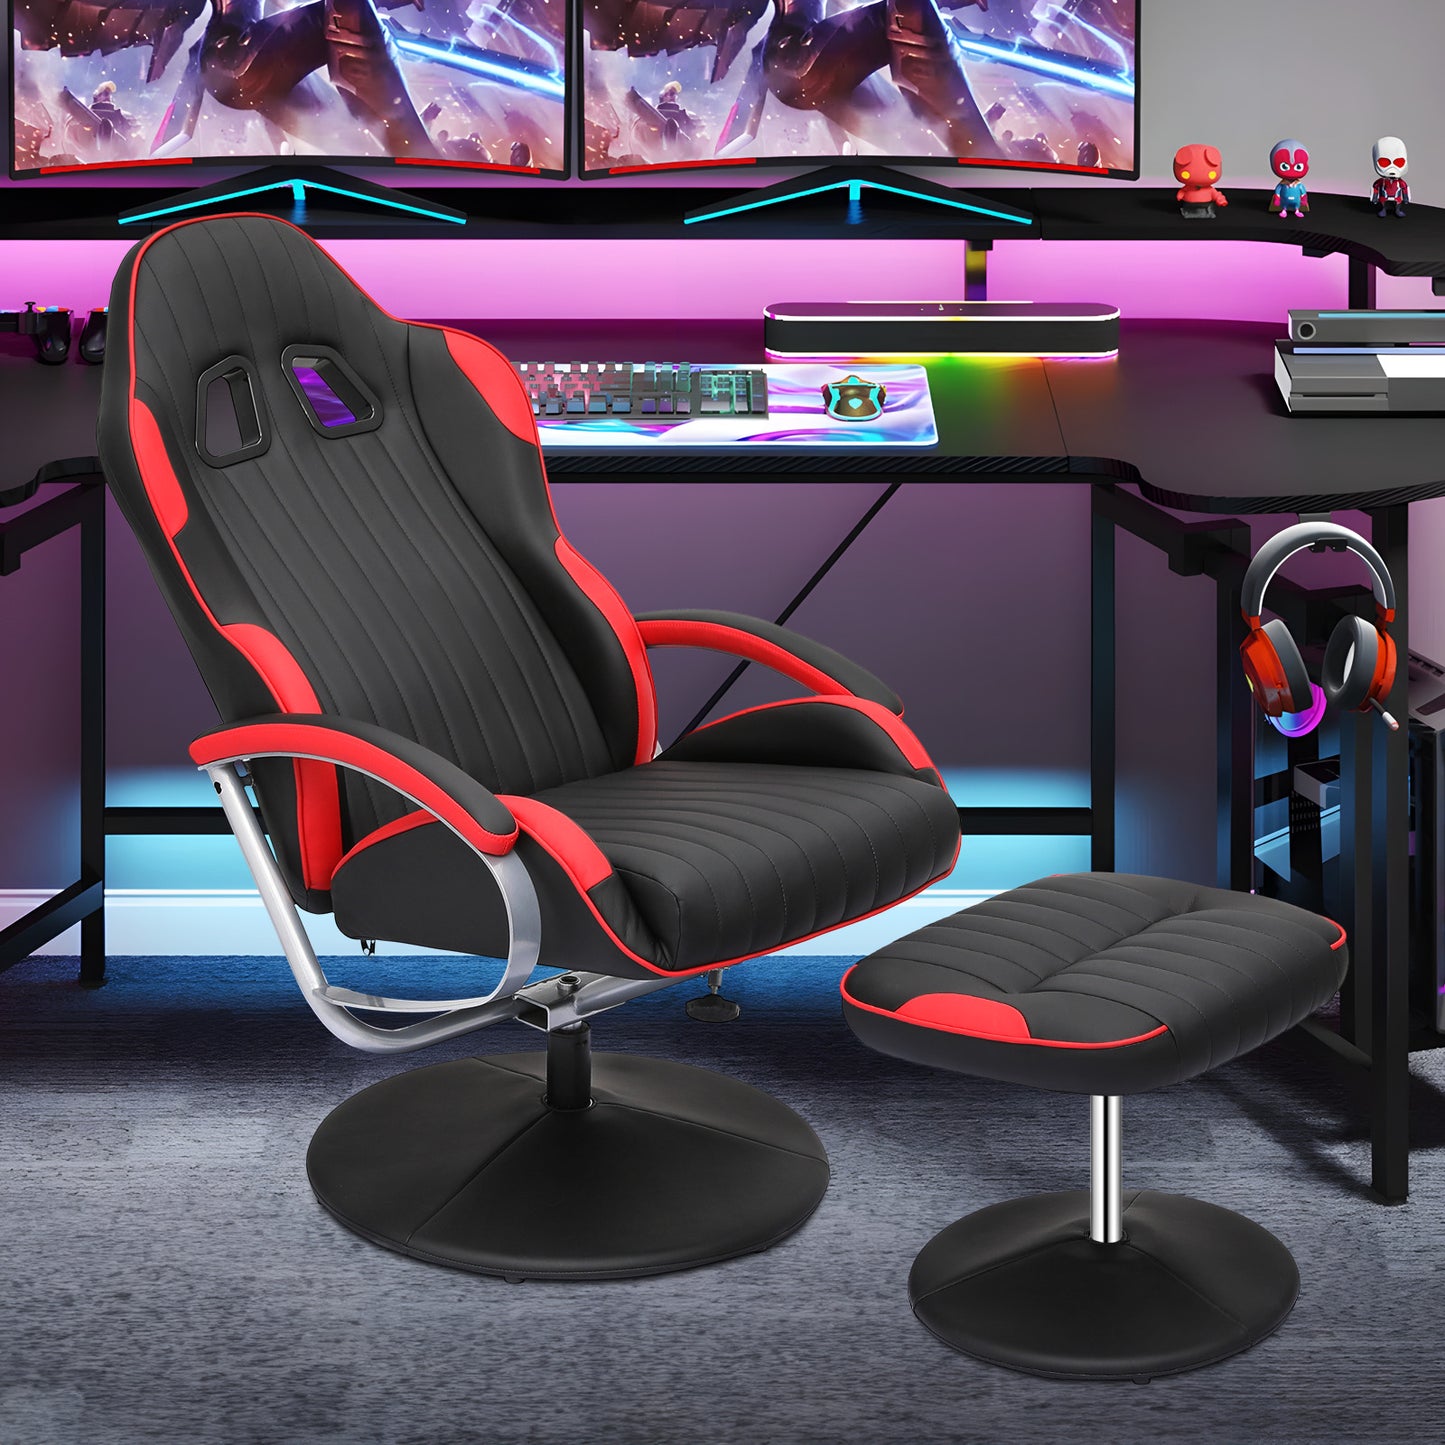 Gaming Chair with Ottoman - PU Leather